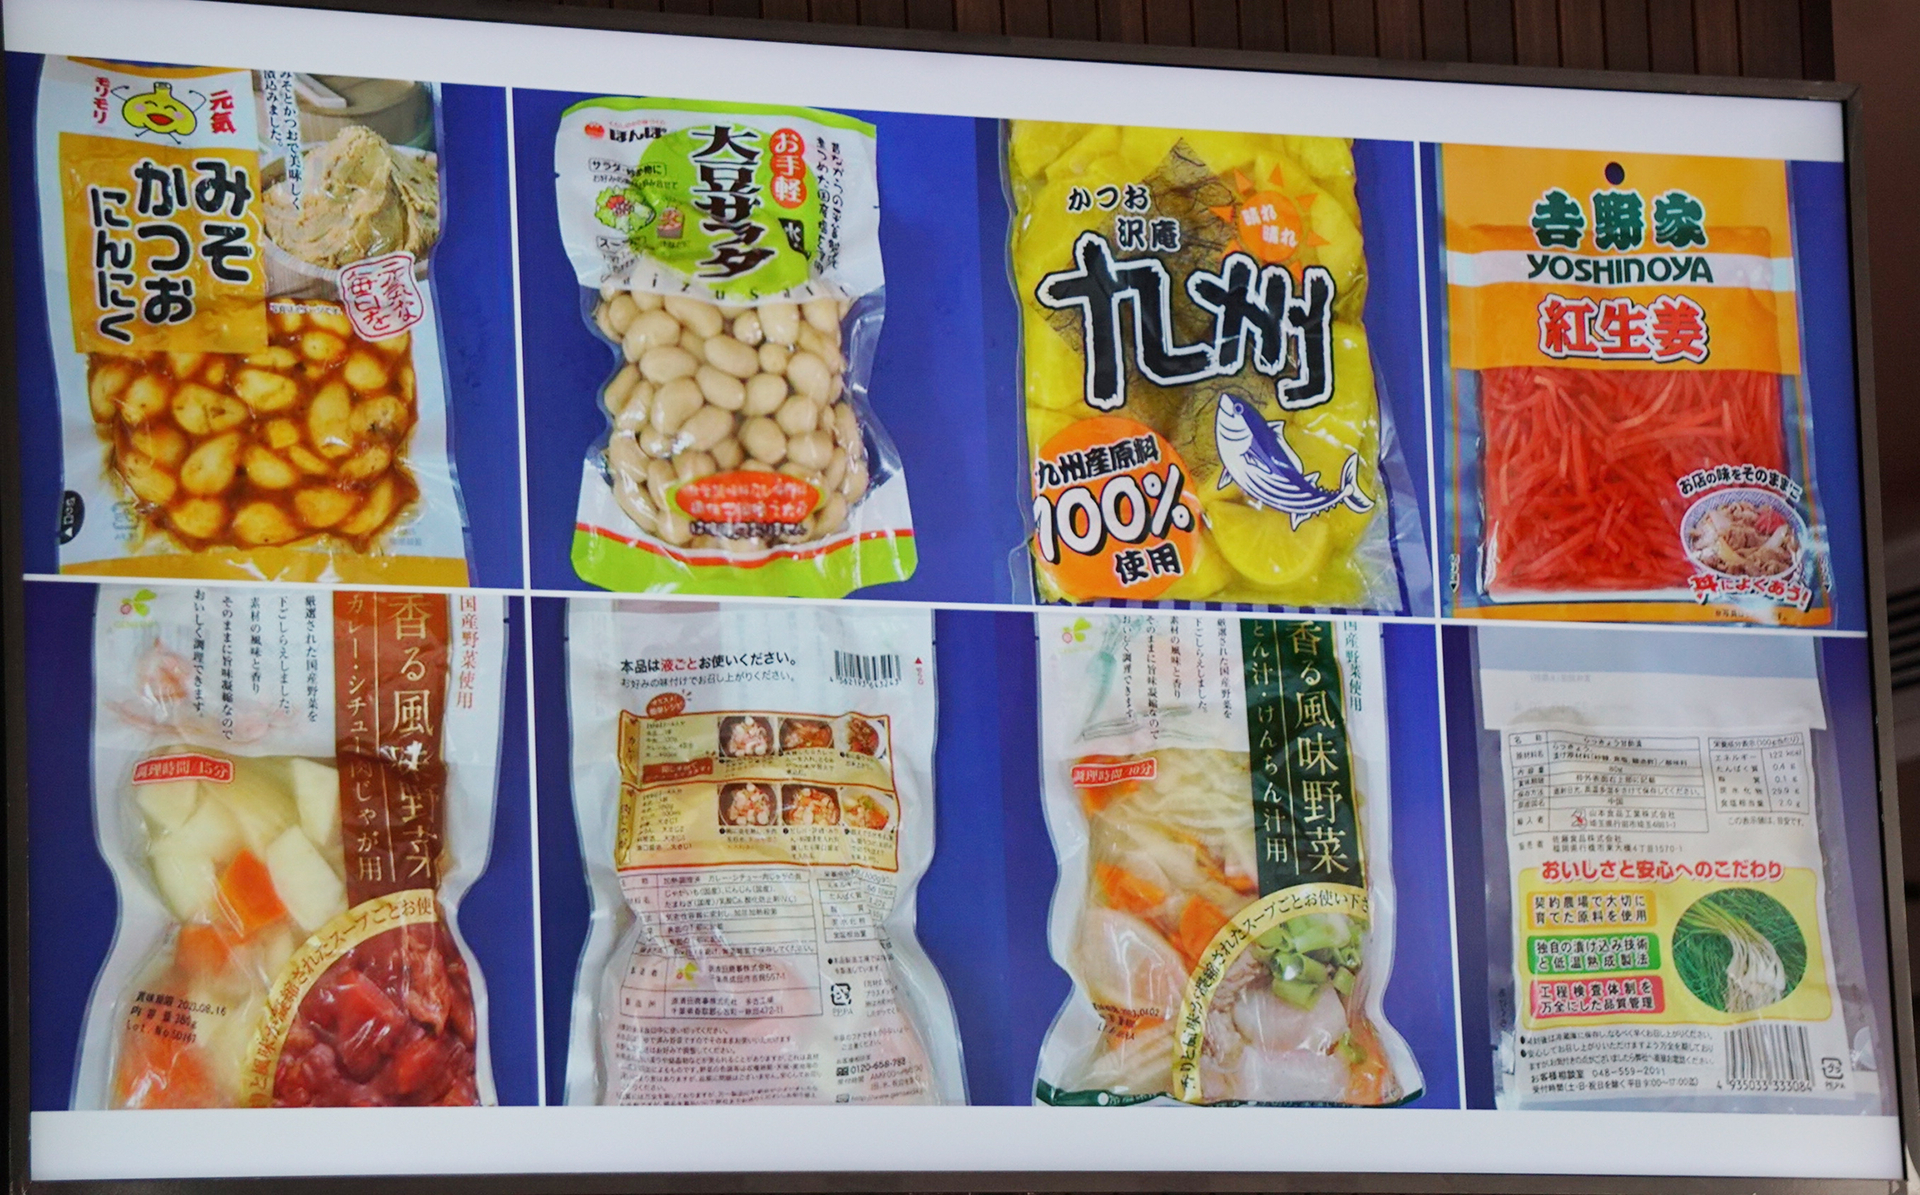 Products of Japanese high school students are offered at supermarkets.